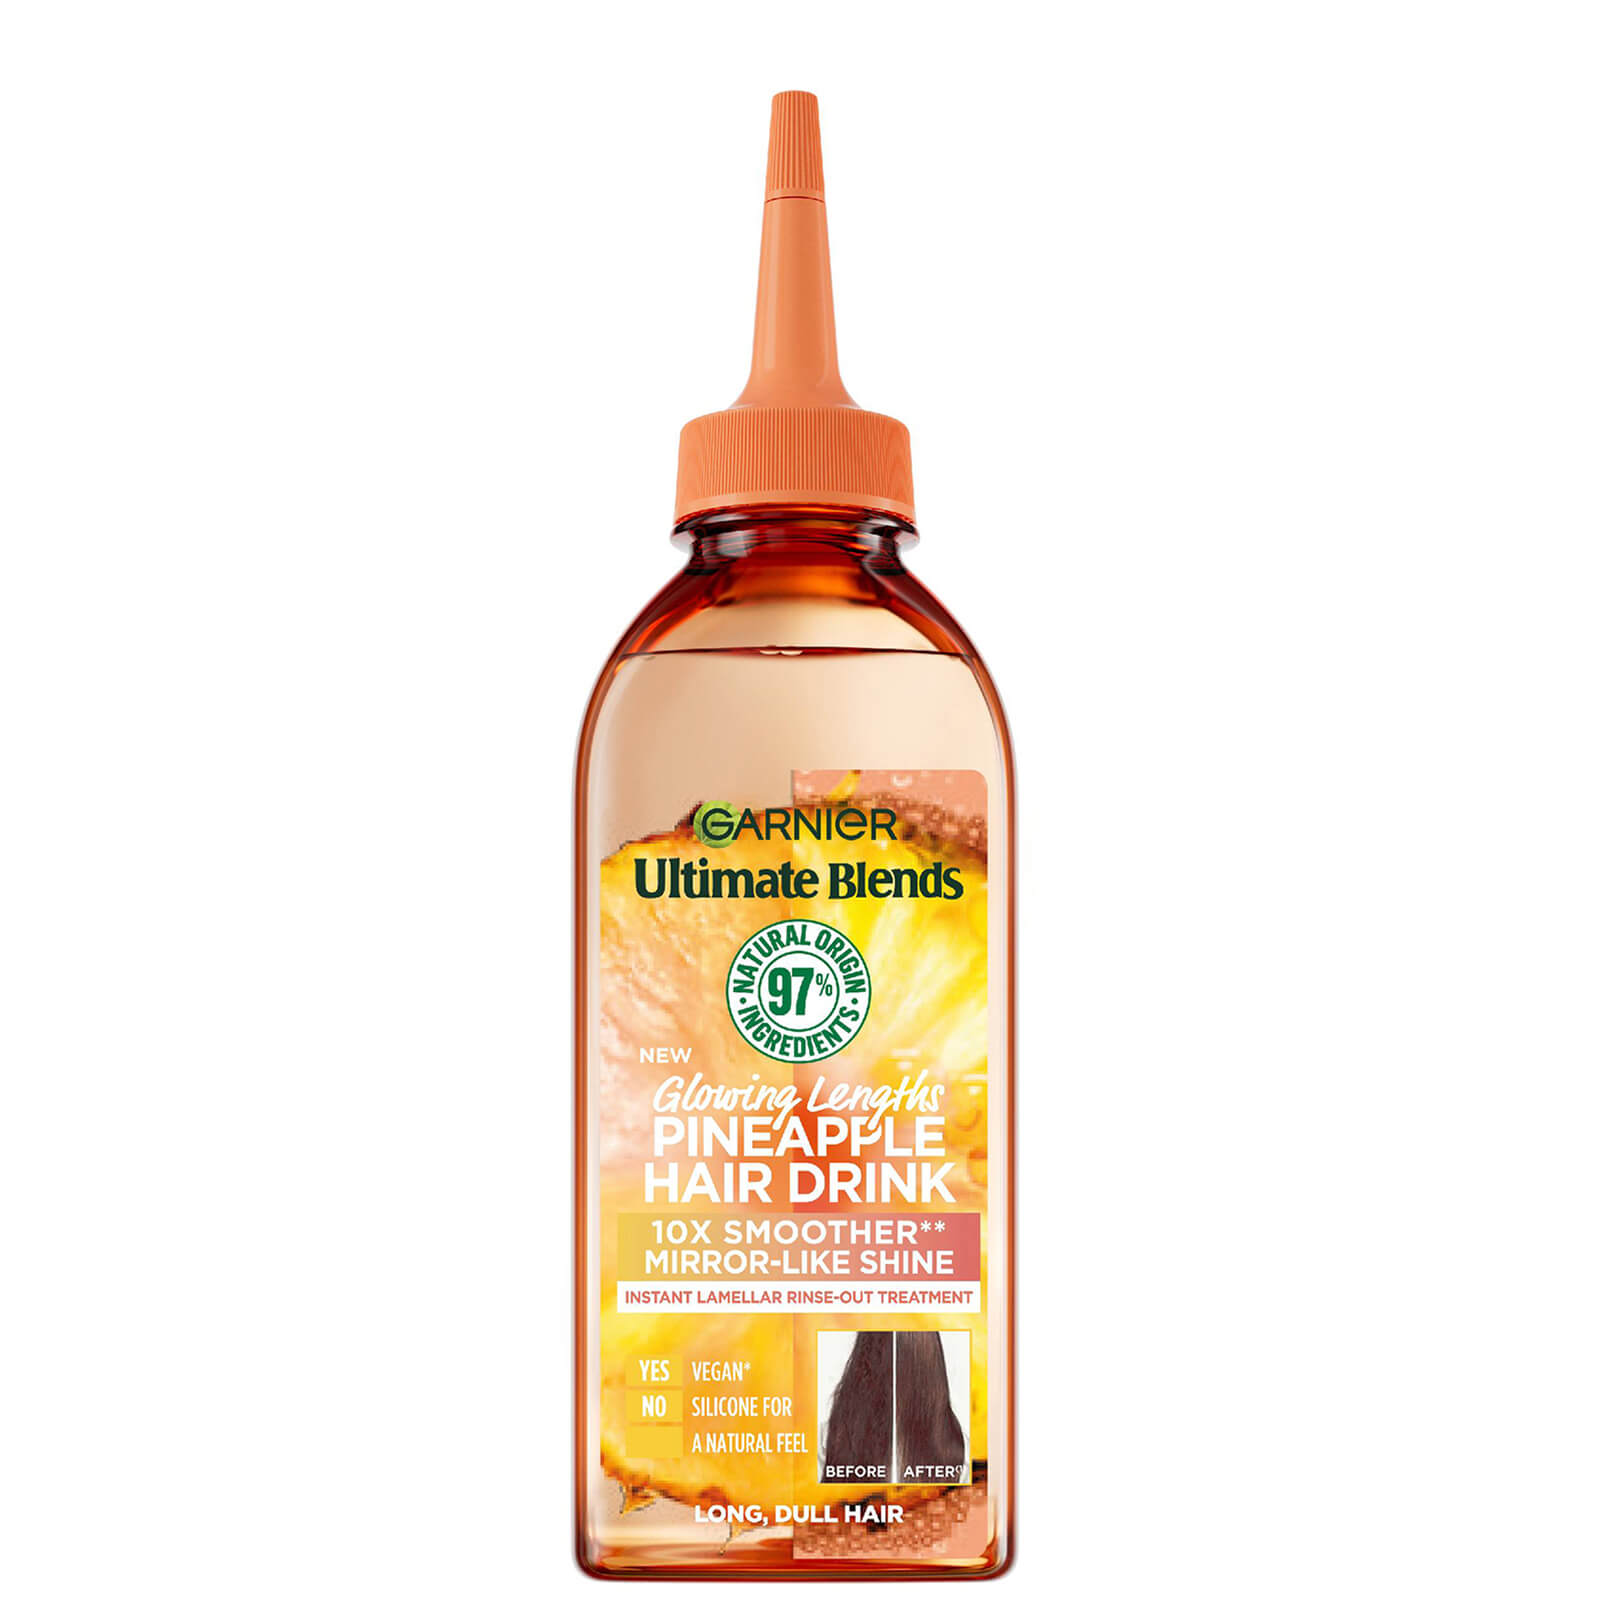 Image of Garnier Ultimate Blends Glowing Lengths Pineapple Hair Drink Liquid Conditioner for Long Dull Hair 200ml